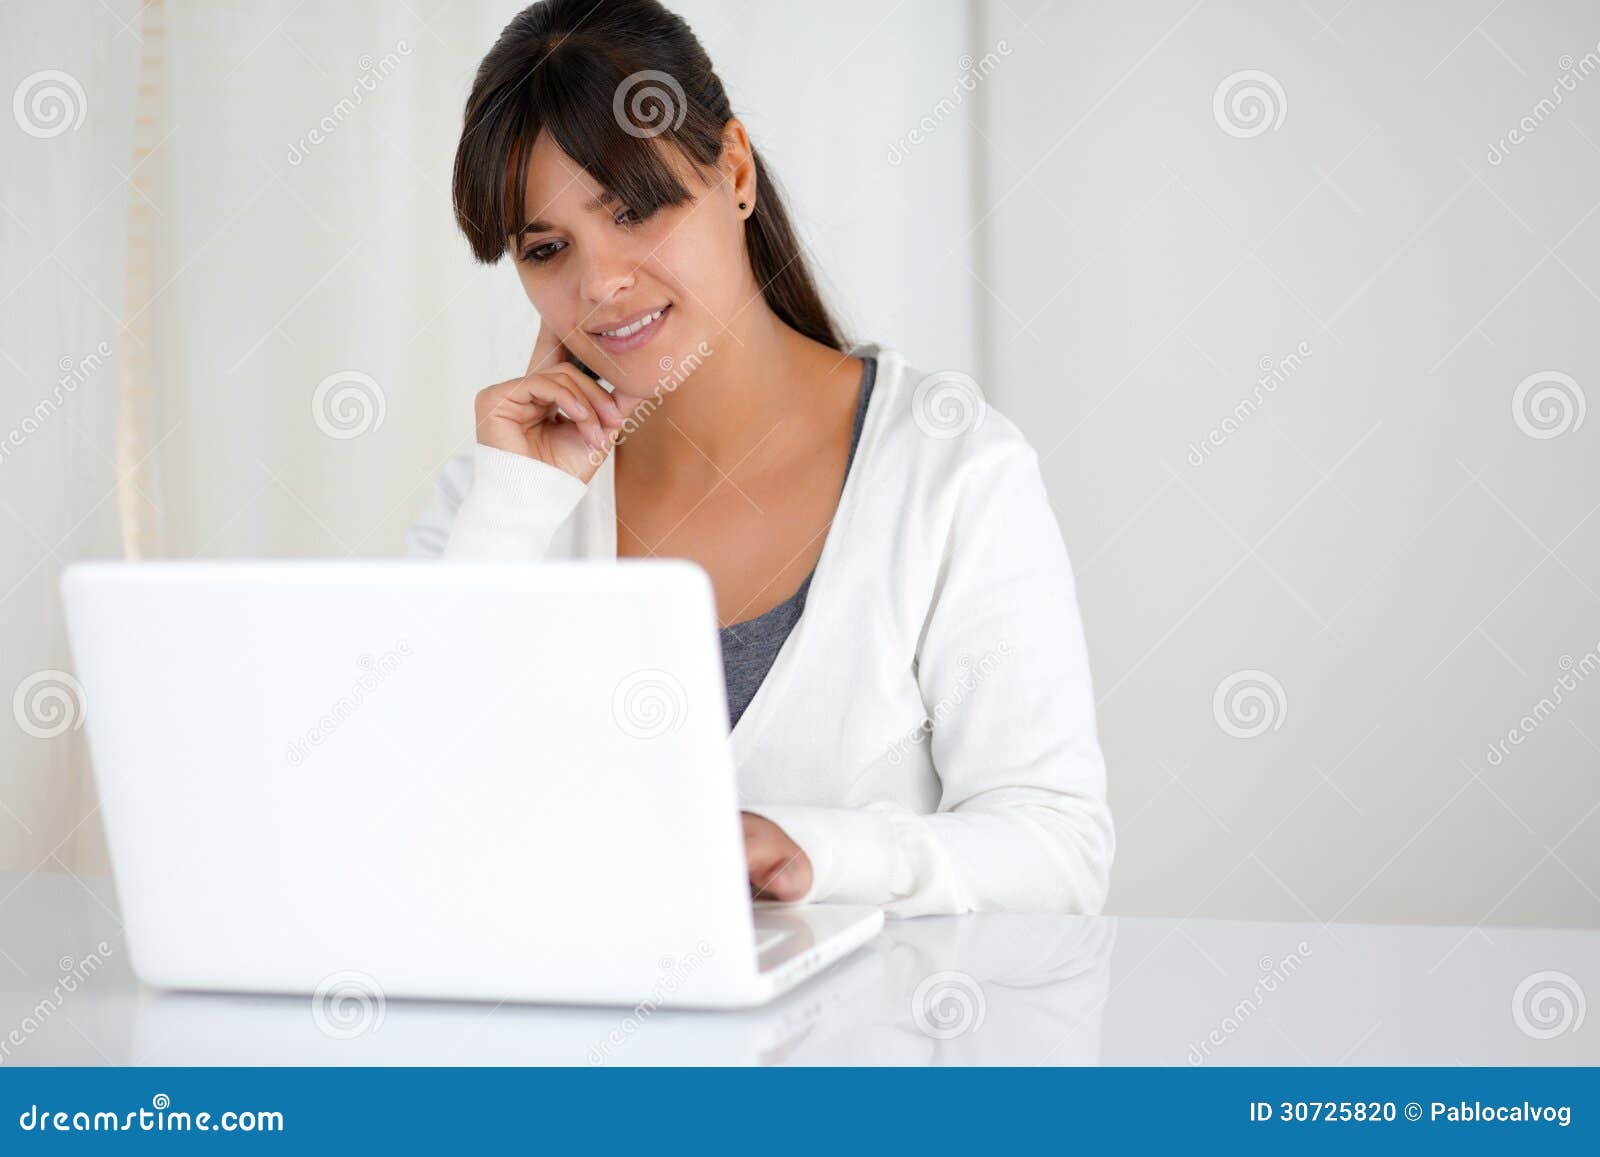 Charming Young Female Reading the Laptop Screen Stock Photo - Image of ...